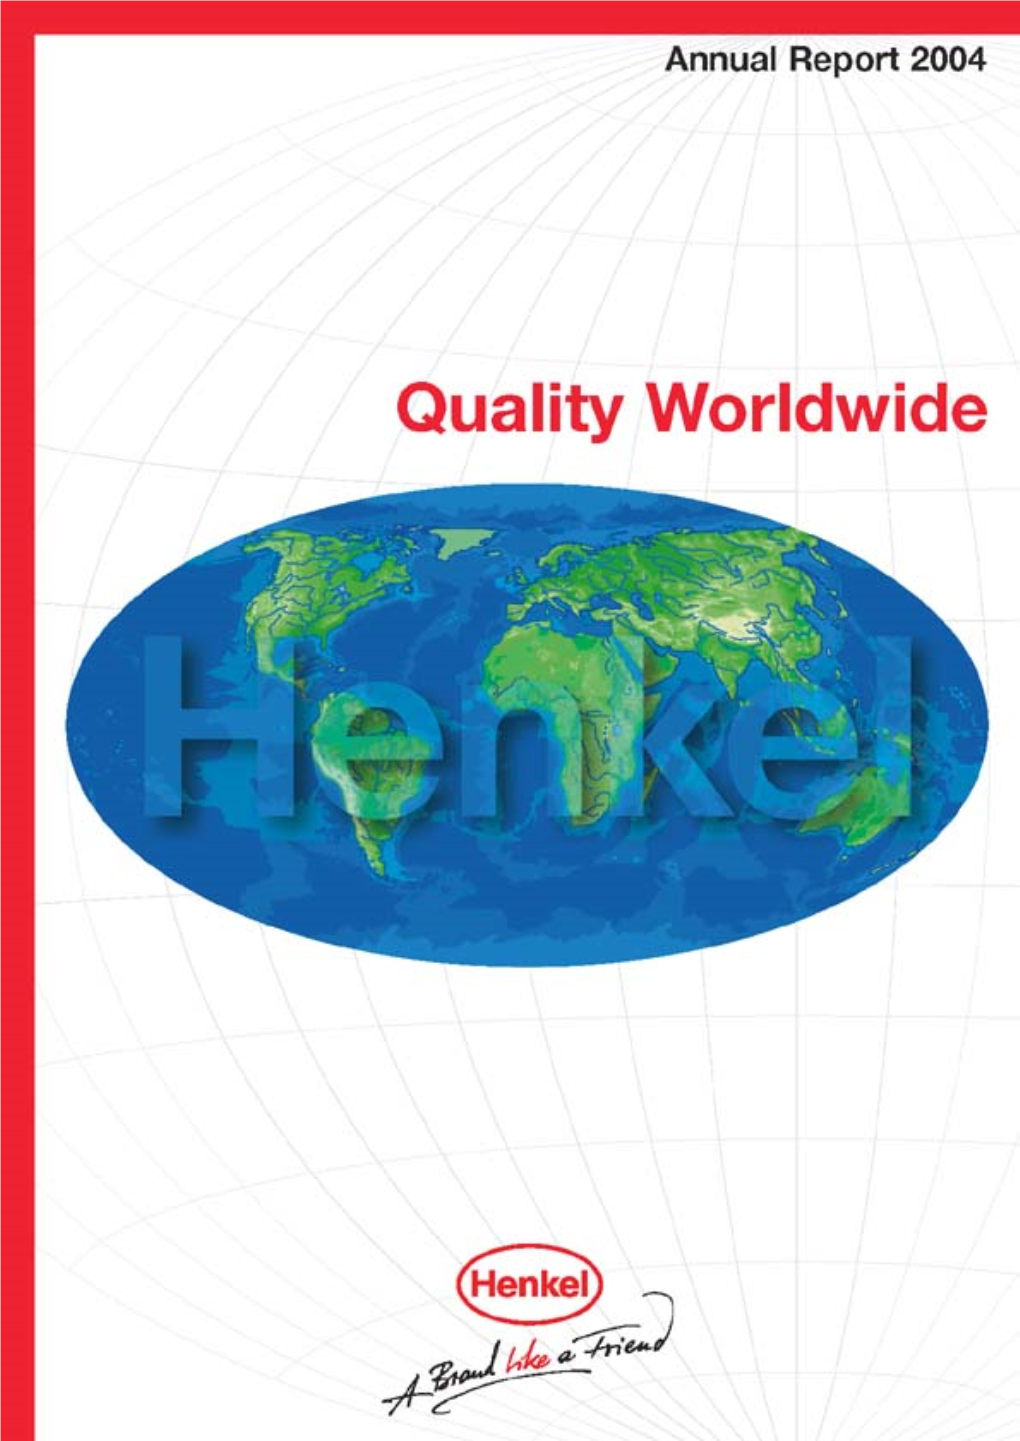 Financial Statements of Henkel Kgaa Earnings Per Preferred Share Rose from 3.65 Euros Are Summarized on Page 94